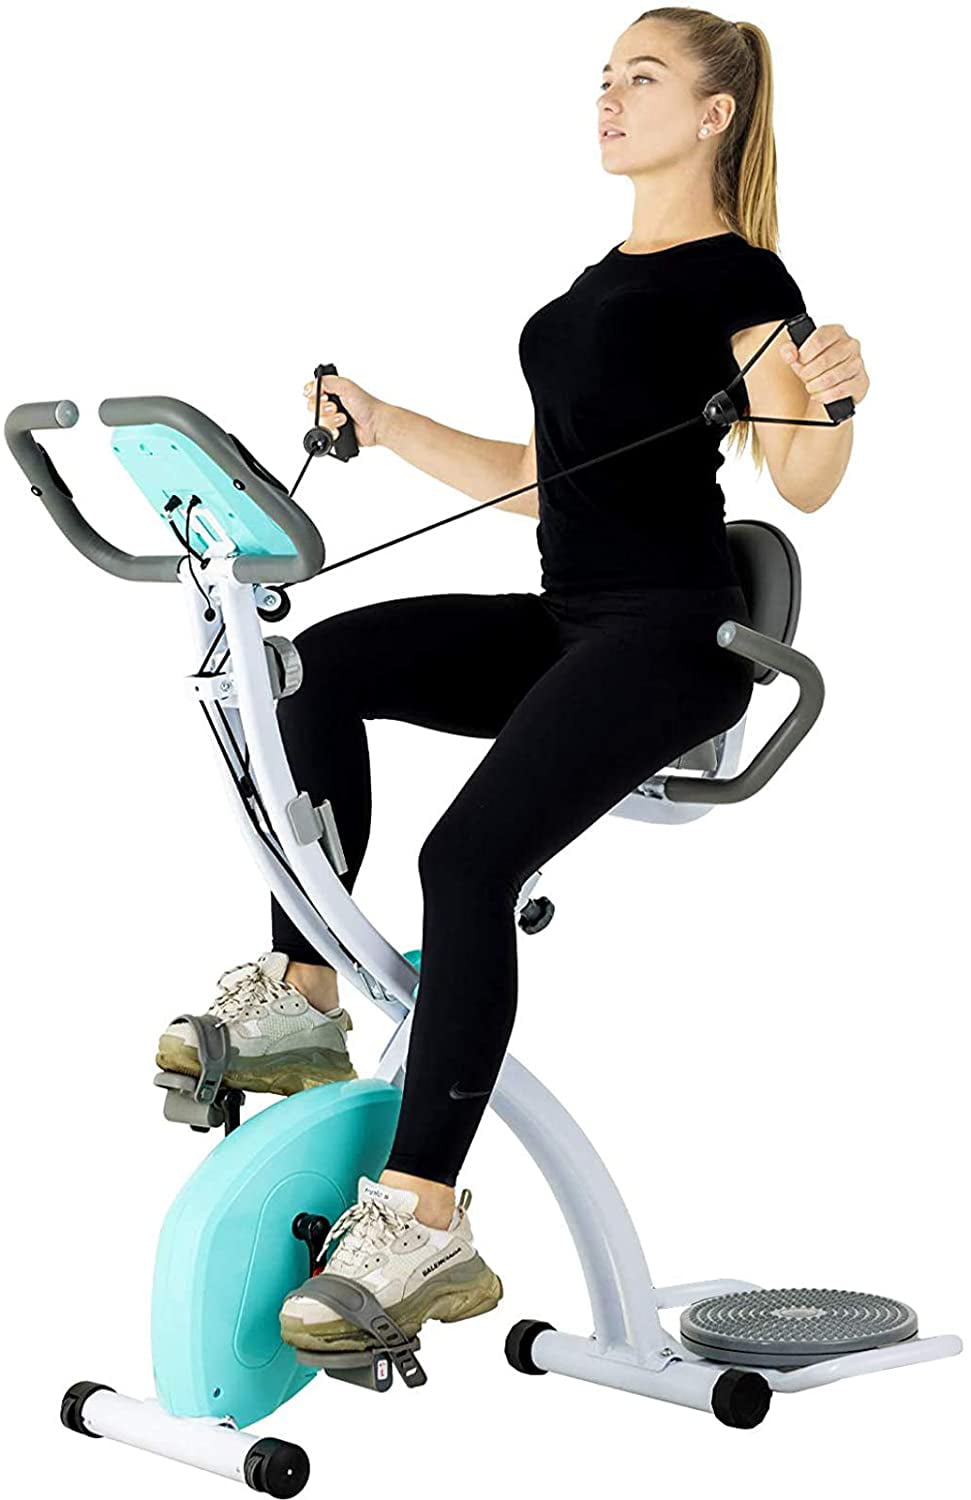 6 Day Arm bicycle workout machines for Weight Loss